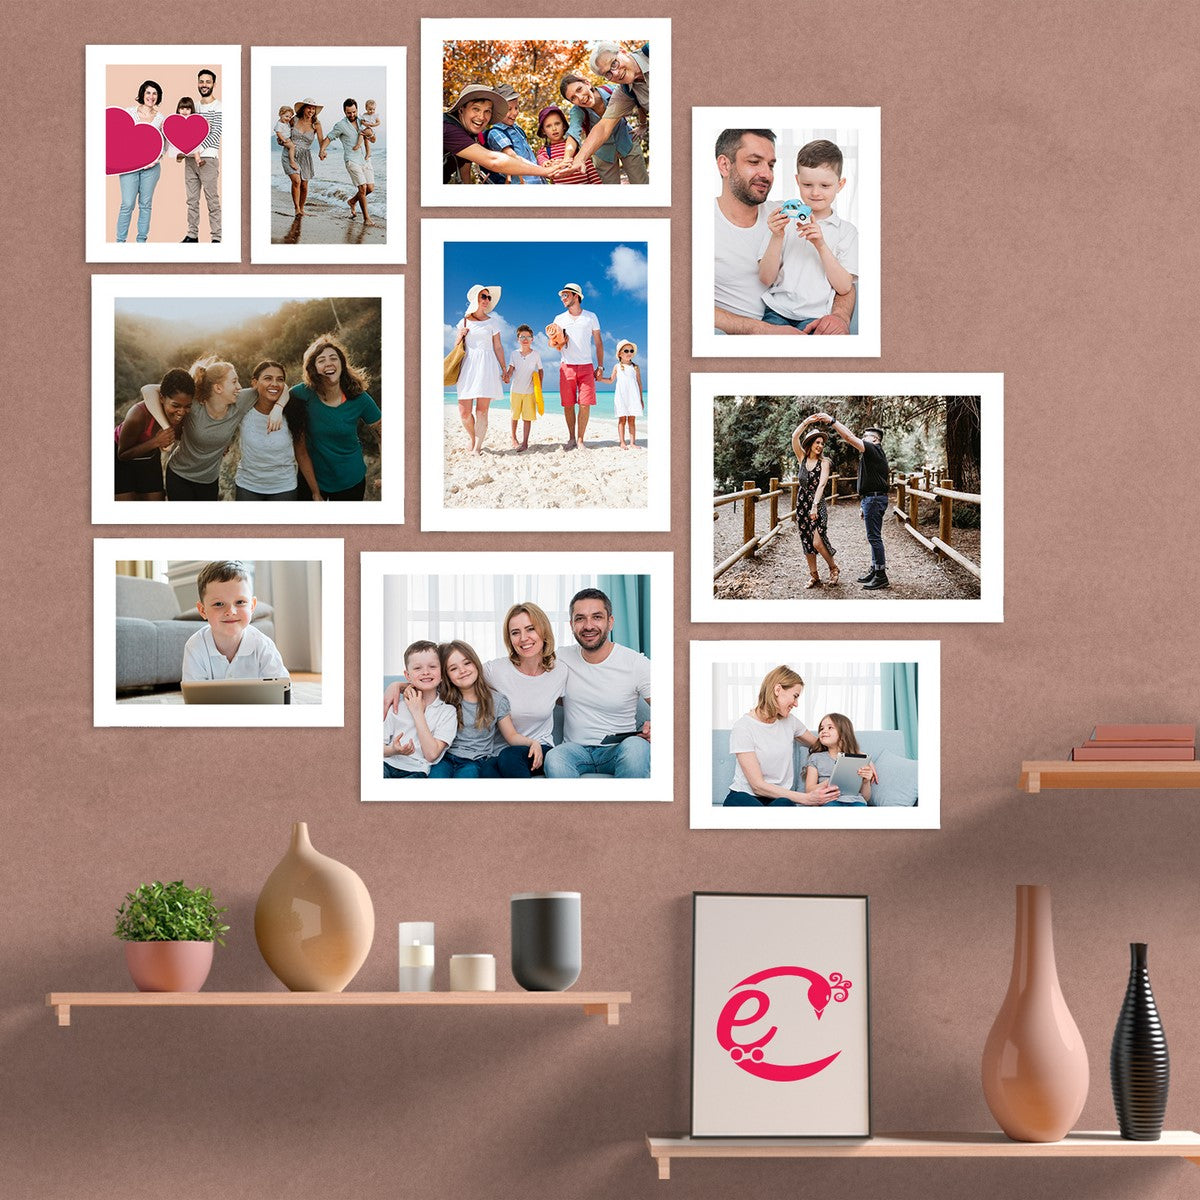 Memory Wall Collage Photo Frame - Set of 10 Photo Frames for 2 Photos of 5"x7", 4 Photos of 6"x8" and 4 Photos of 8"x10" 1